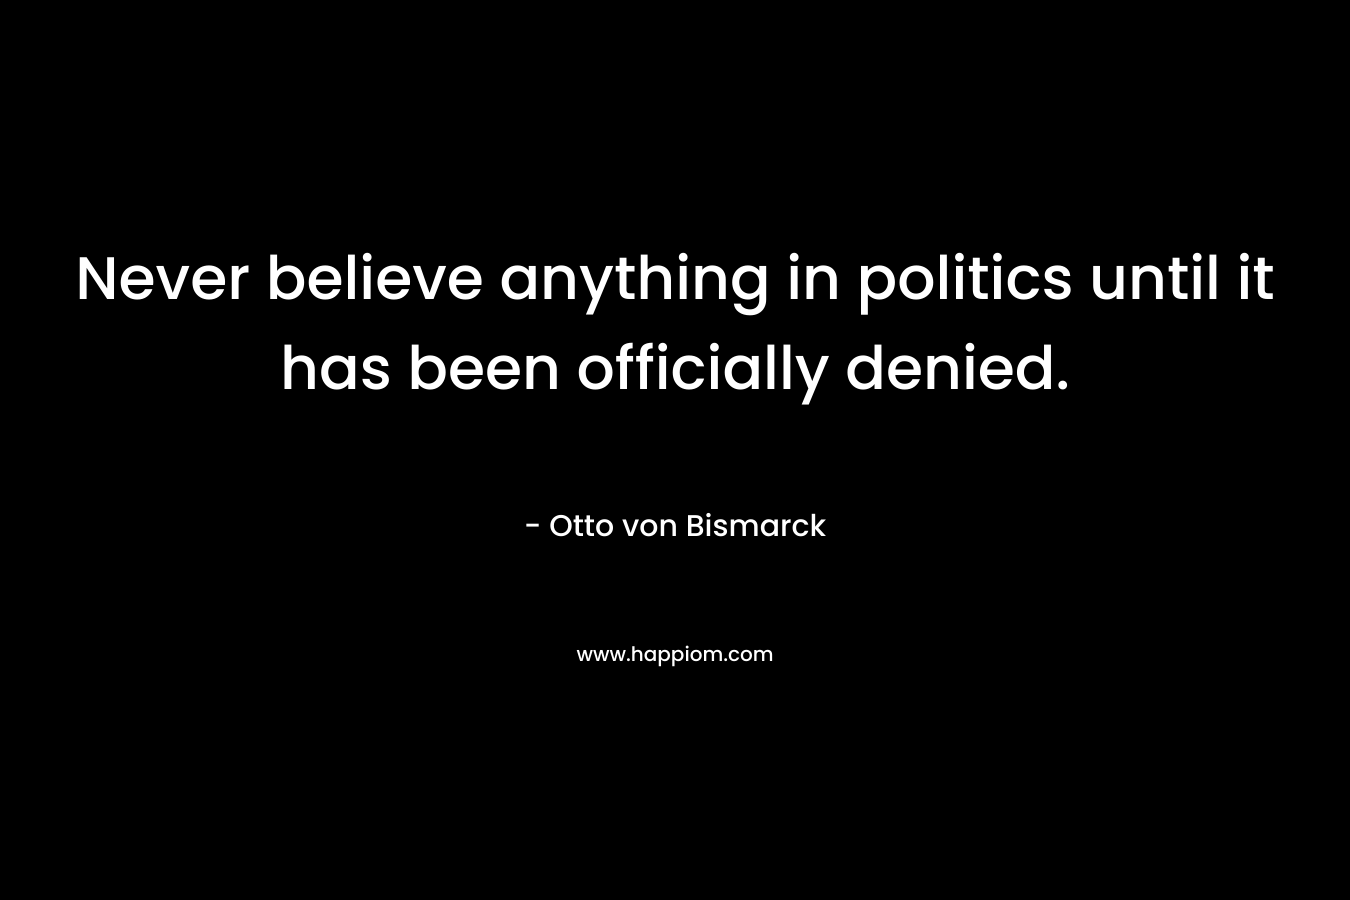 Never believe anything in politics until it has been officially denied.